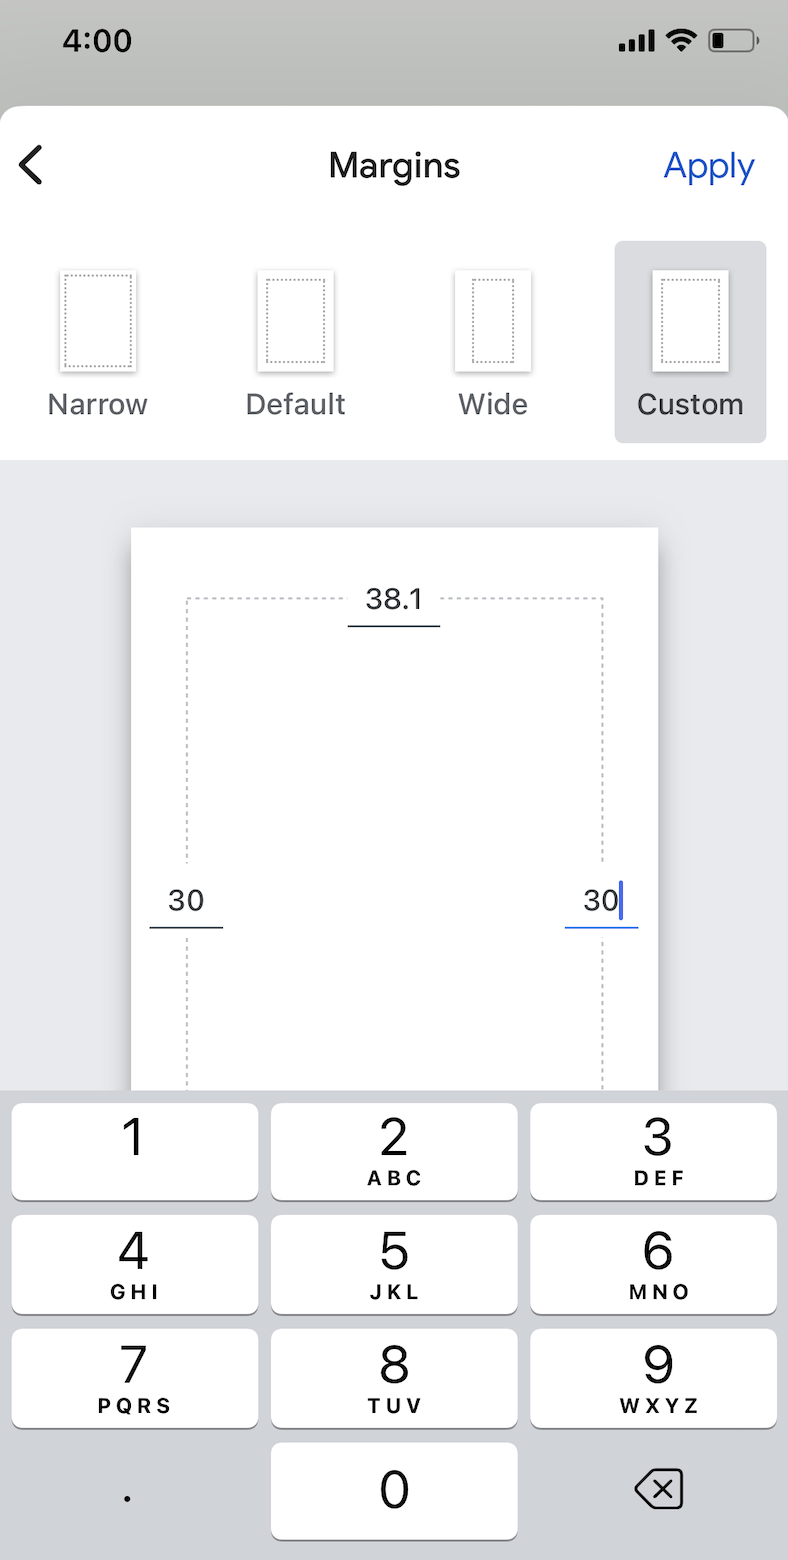 How to enter custom margins in Google Docs in the mobile app for iPhone.